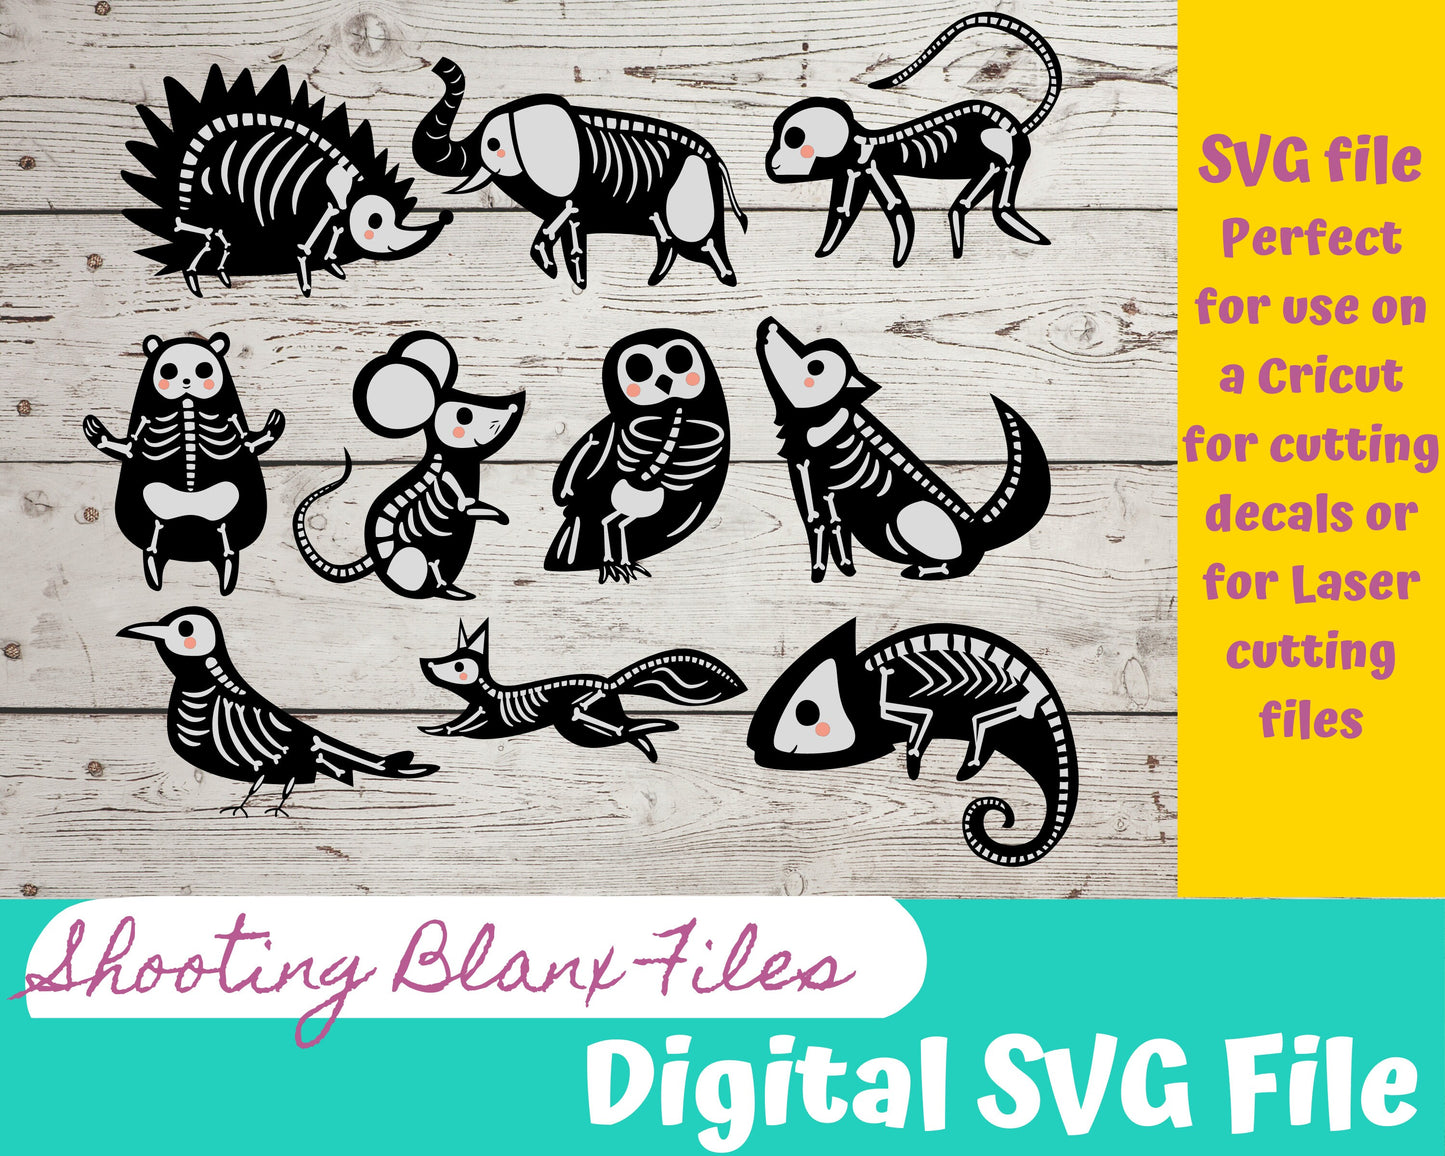 Animal Skeleton 22 SVG Bundle file perfect for Cricut, Cameo, or Silhouette also for laser engraving Glowforge, Scary, Halloween, animal